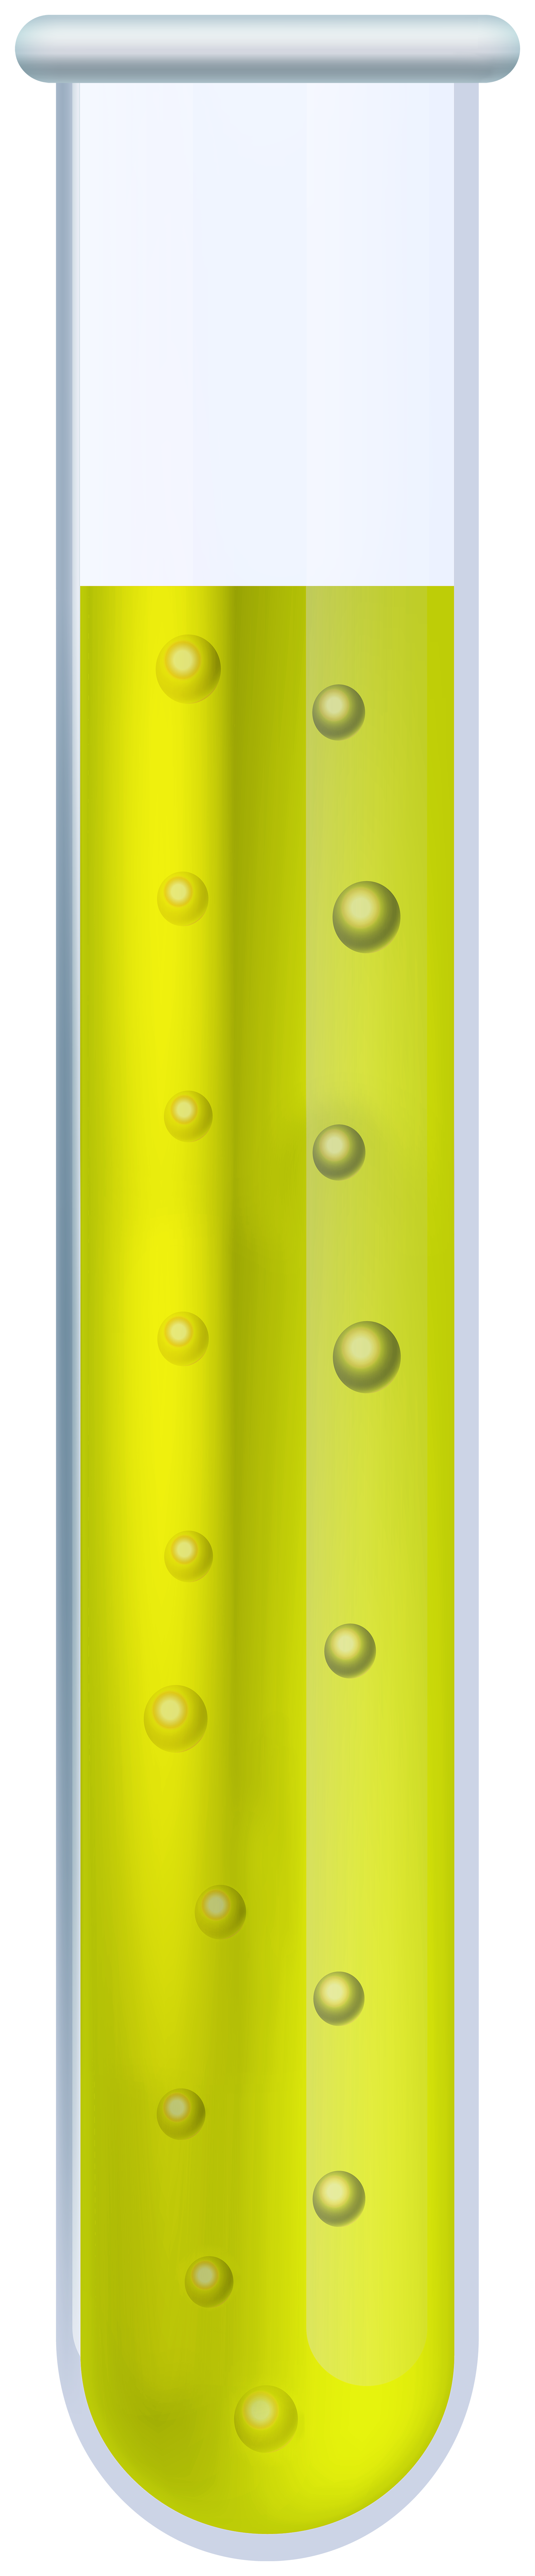 Yellow Liquid Sample In Test Tube PNG Clipart - Best WEB Clipart